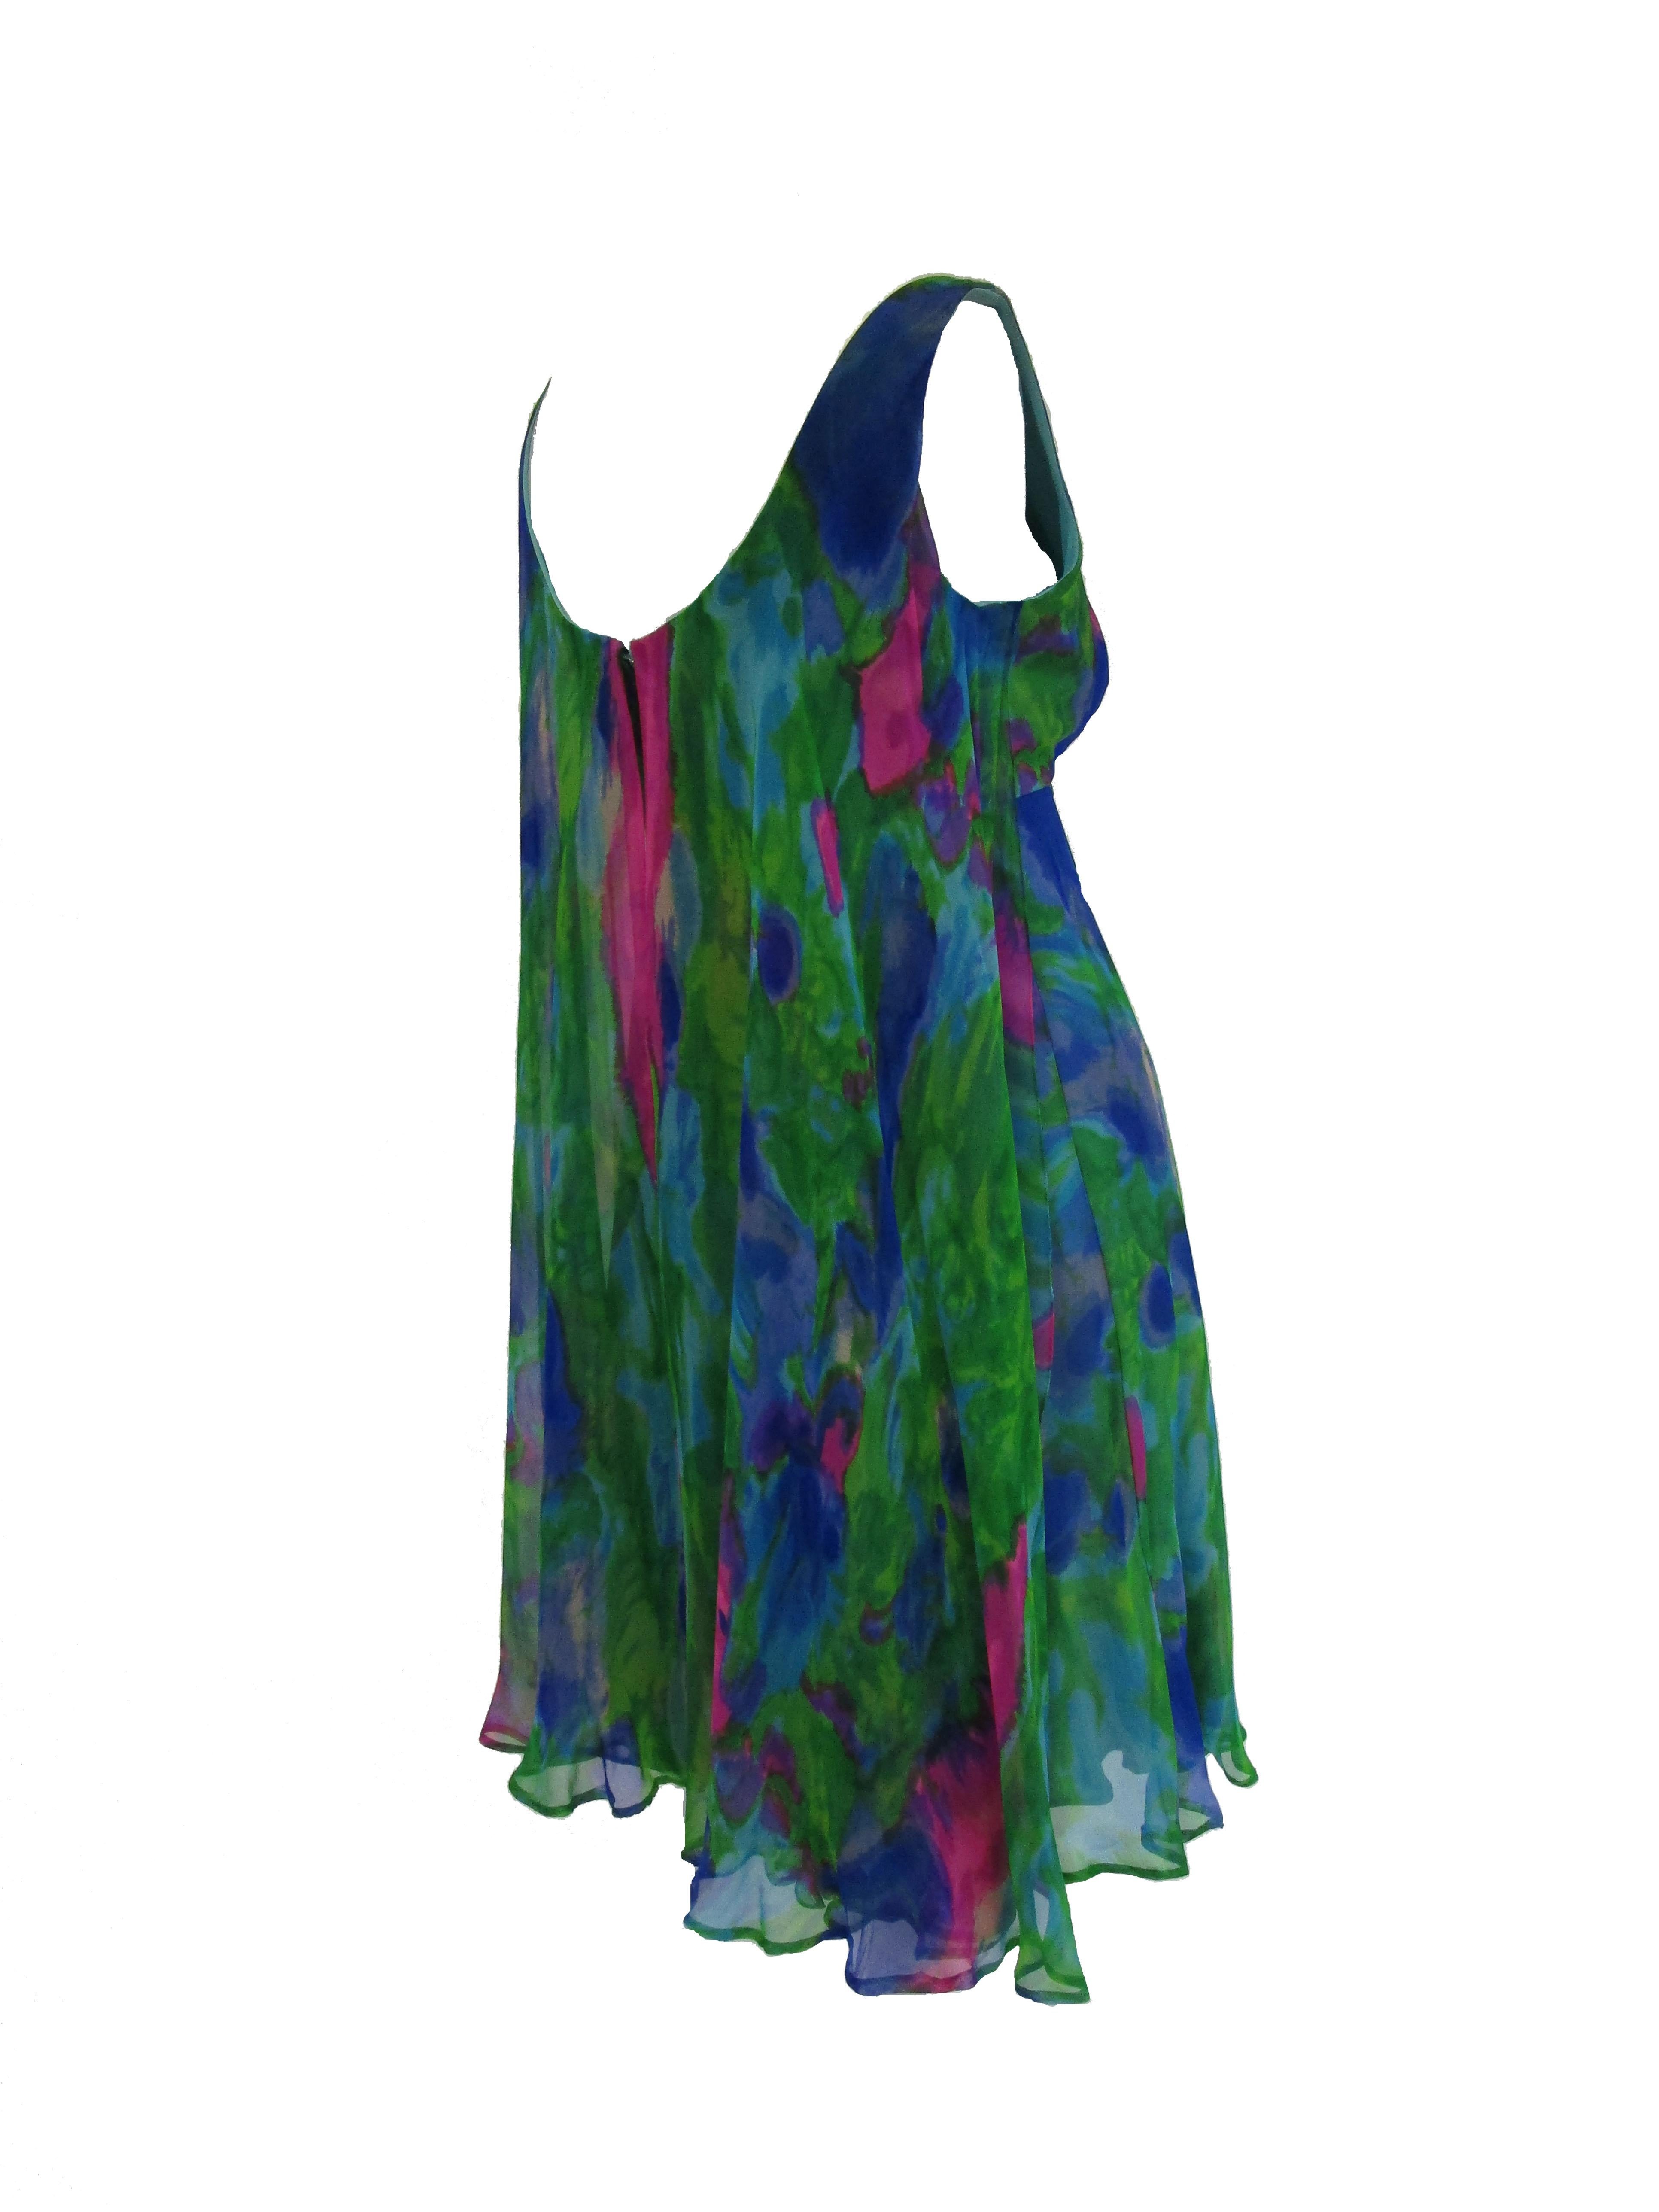 1960s Psychedelic Jerry Silverman Silk Low Back Mini Dress with Organza Overlay In Excellent Condition For Sale In Houston, TX